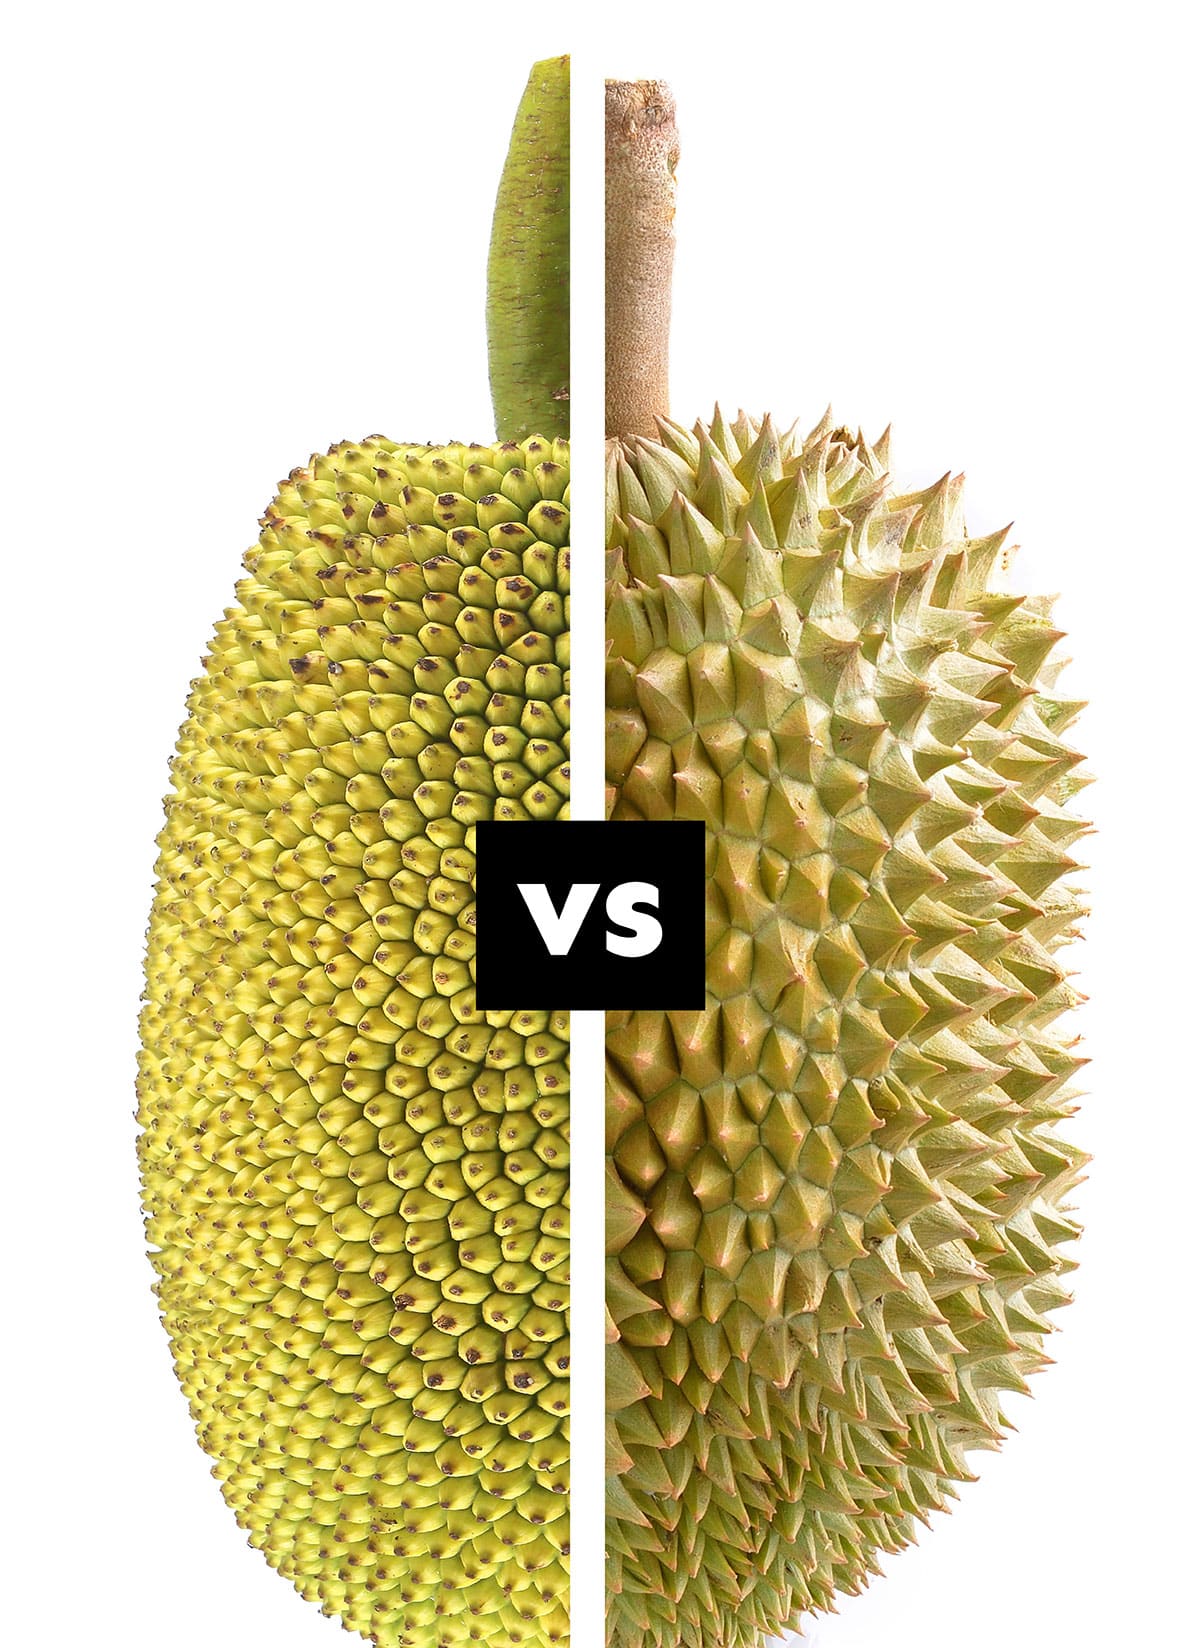 Jackfruit and durian side by side